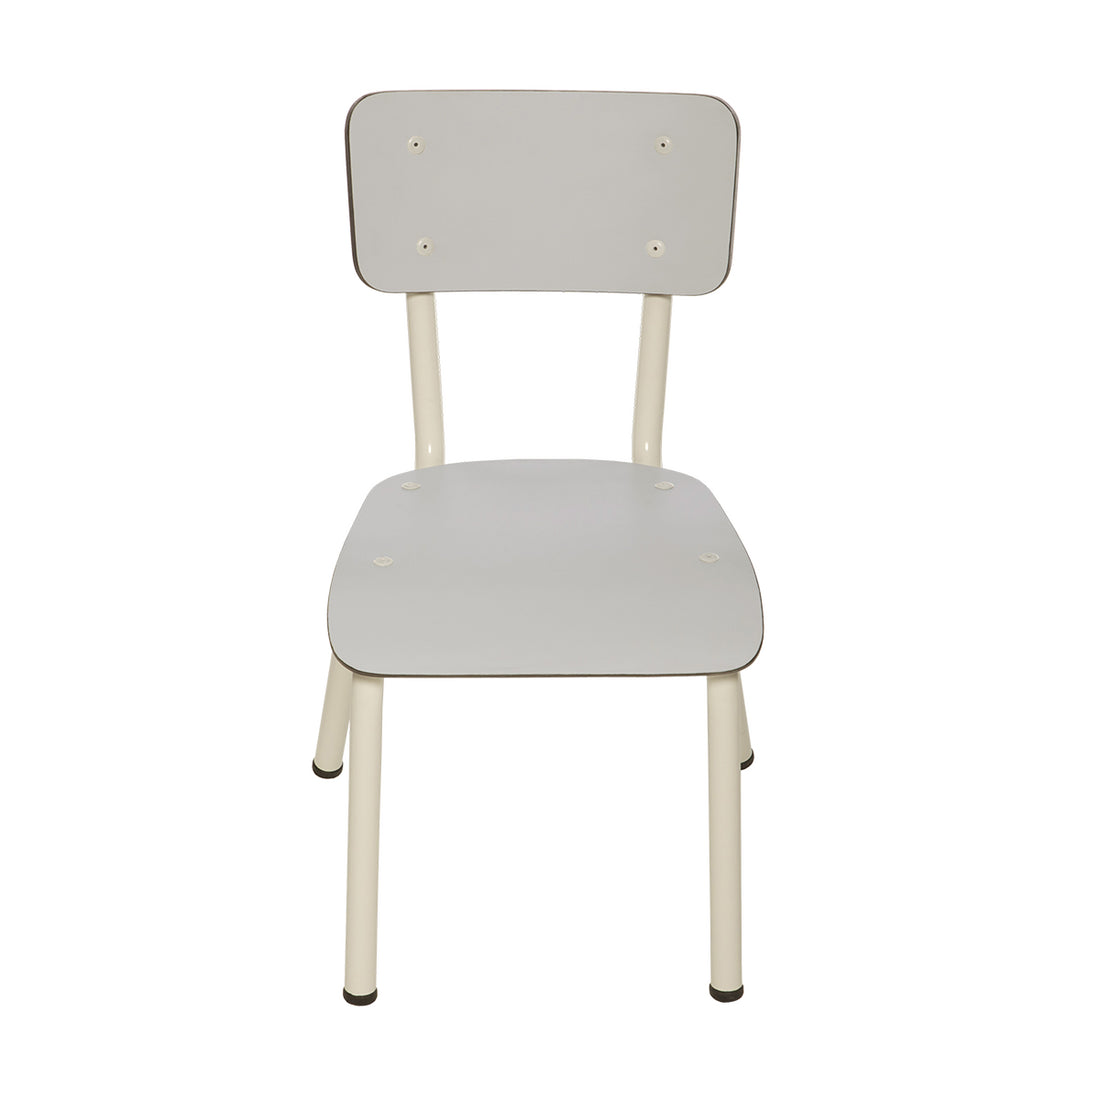 Les Gambettes Little Suzie Chair Light Grey (Pre-Order; Est. Delivery in 6-10 Weeks)